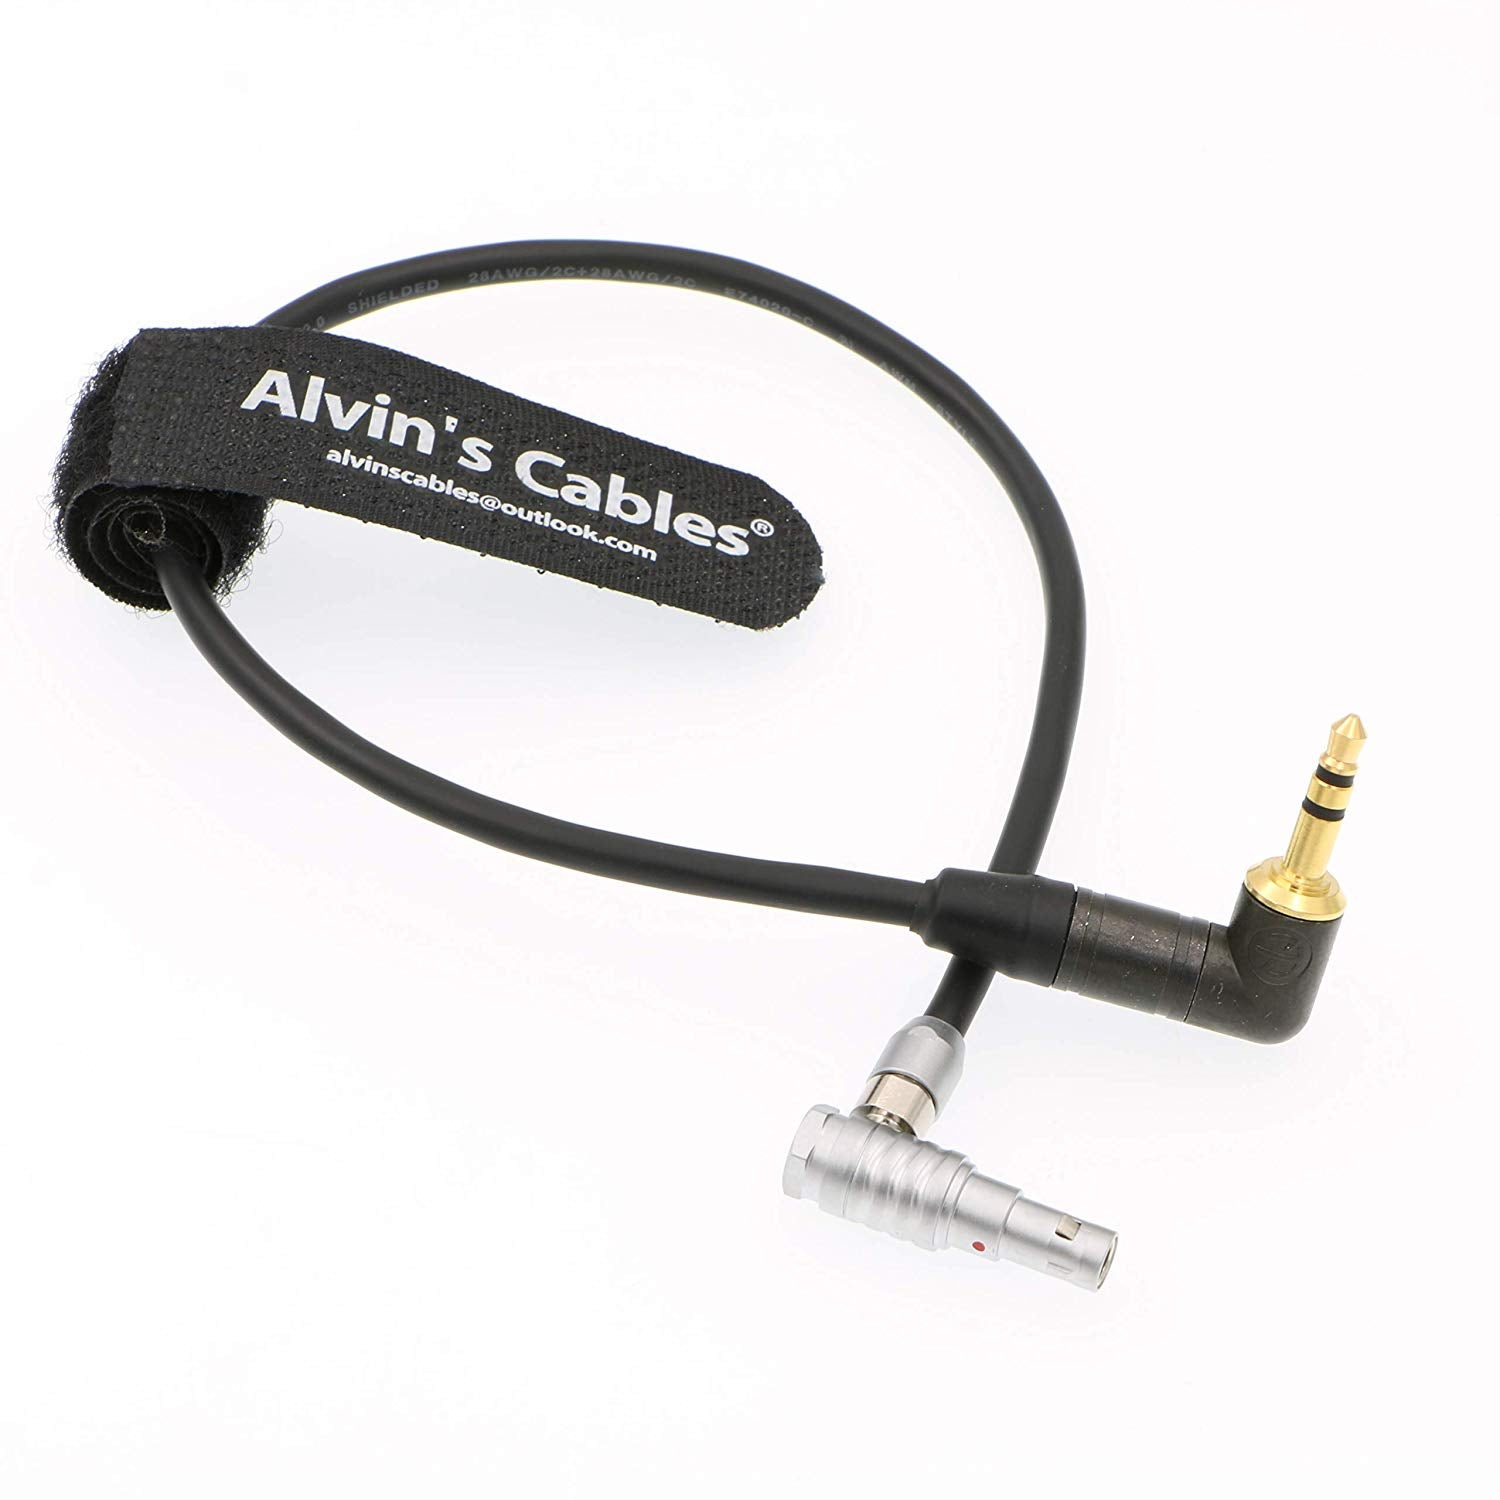 Alvin's Cables 5 Pin Right Angle Male to Right Angle 3.5mm TRS Audio Cable for Z CAM E2 Camera